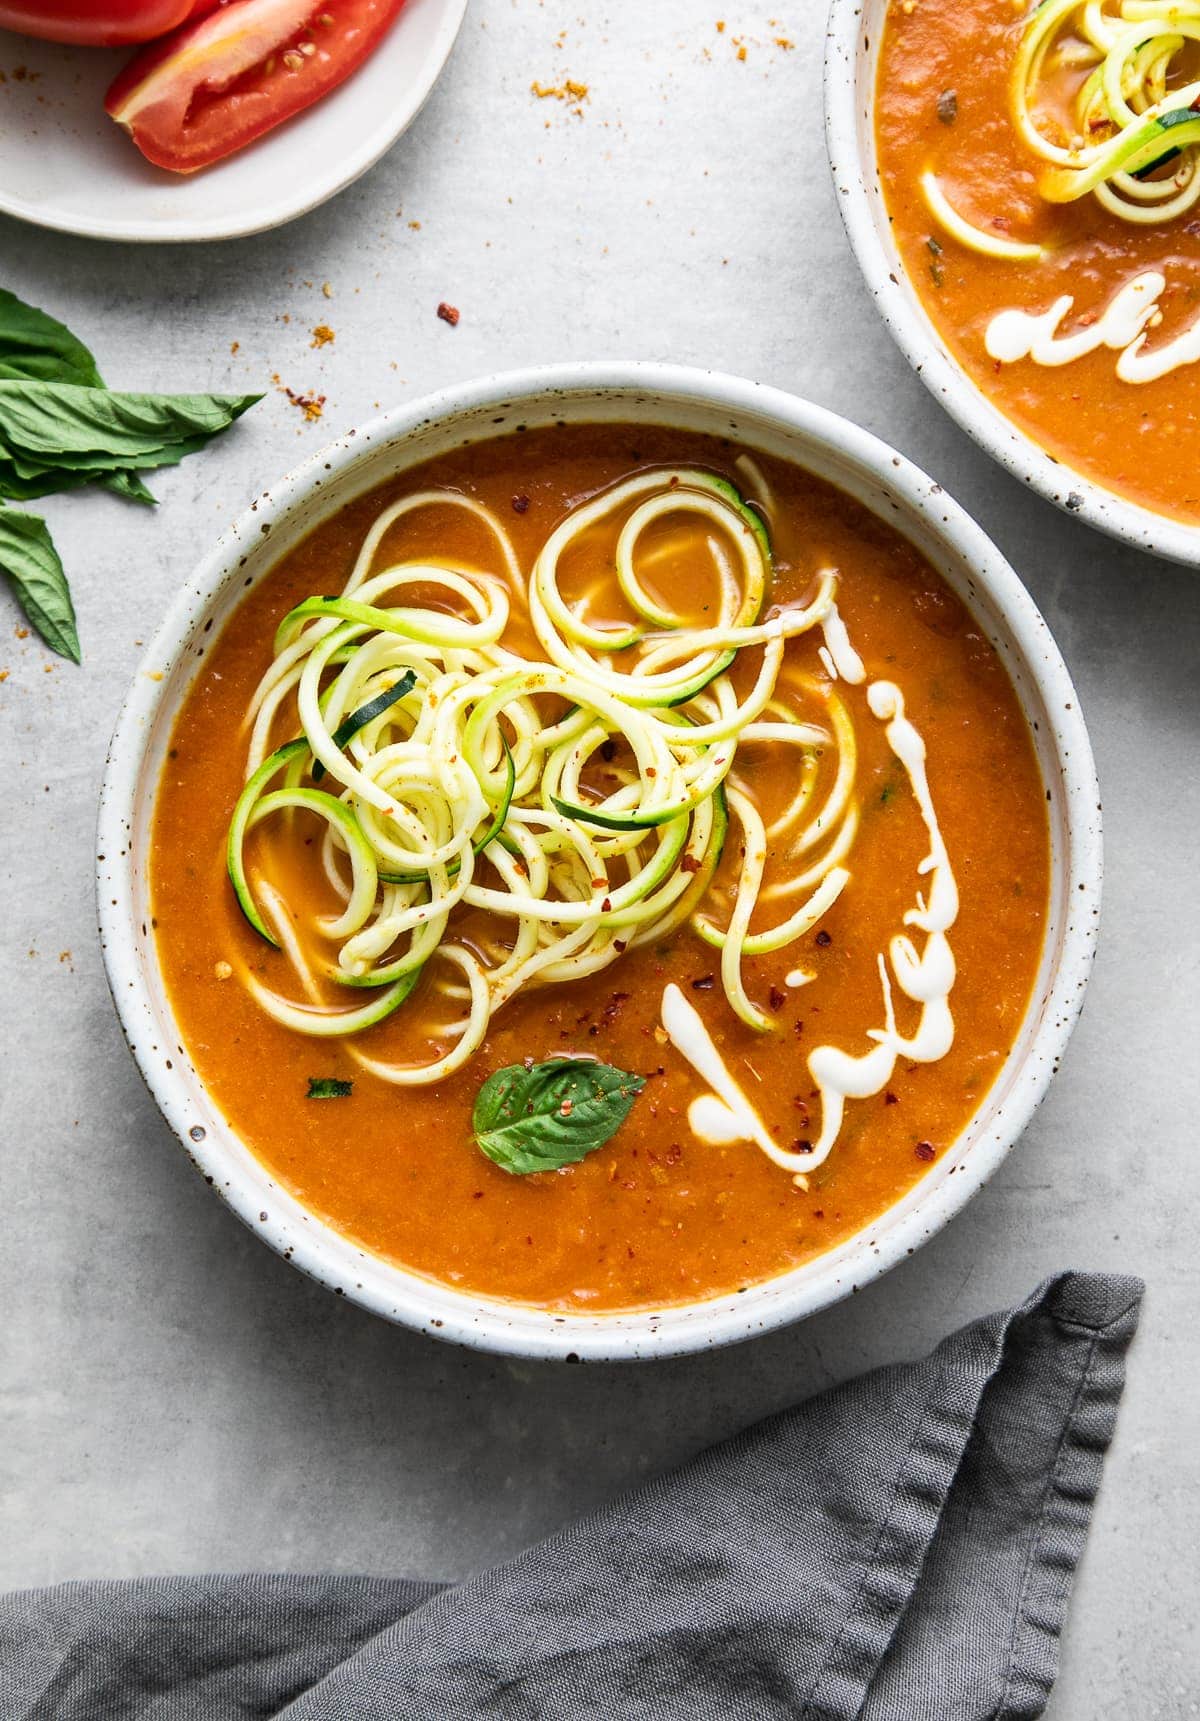 SPICY TOMATO SOUP WITH CURRY